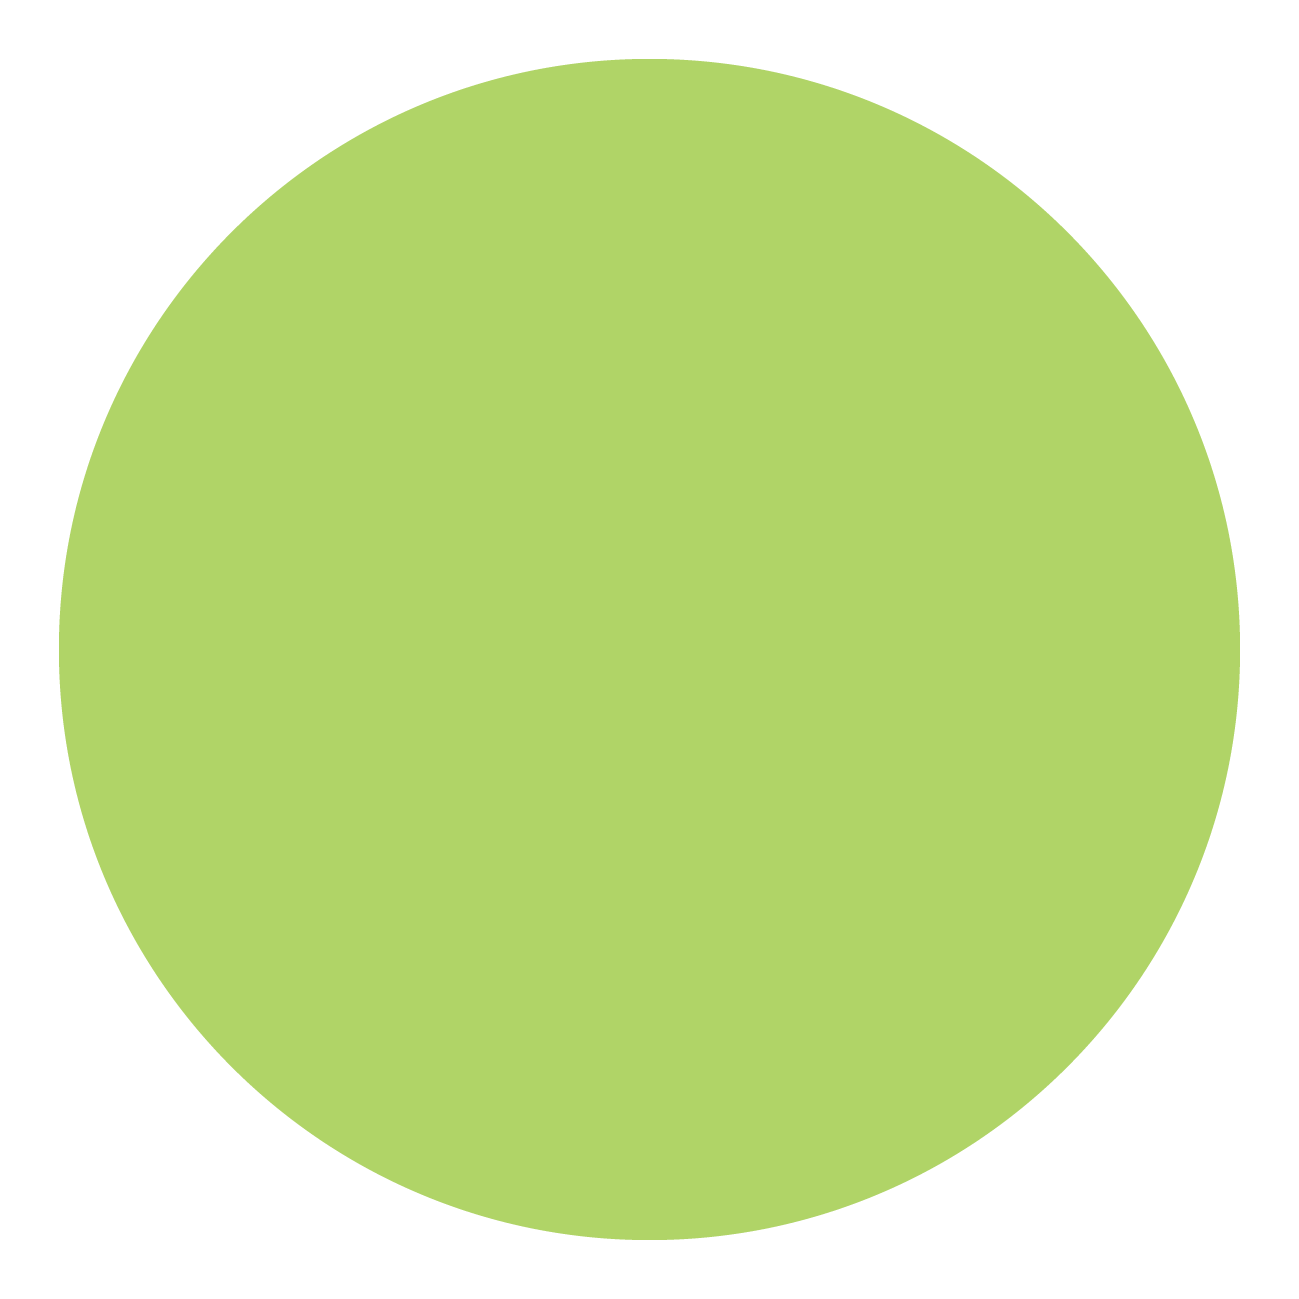 Green Circle PNG Transparent Background, Free Download #44659